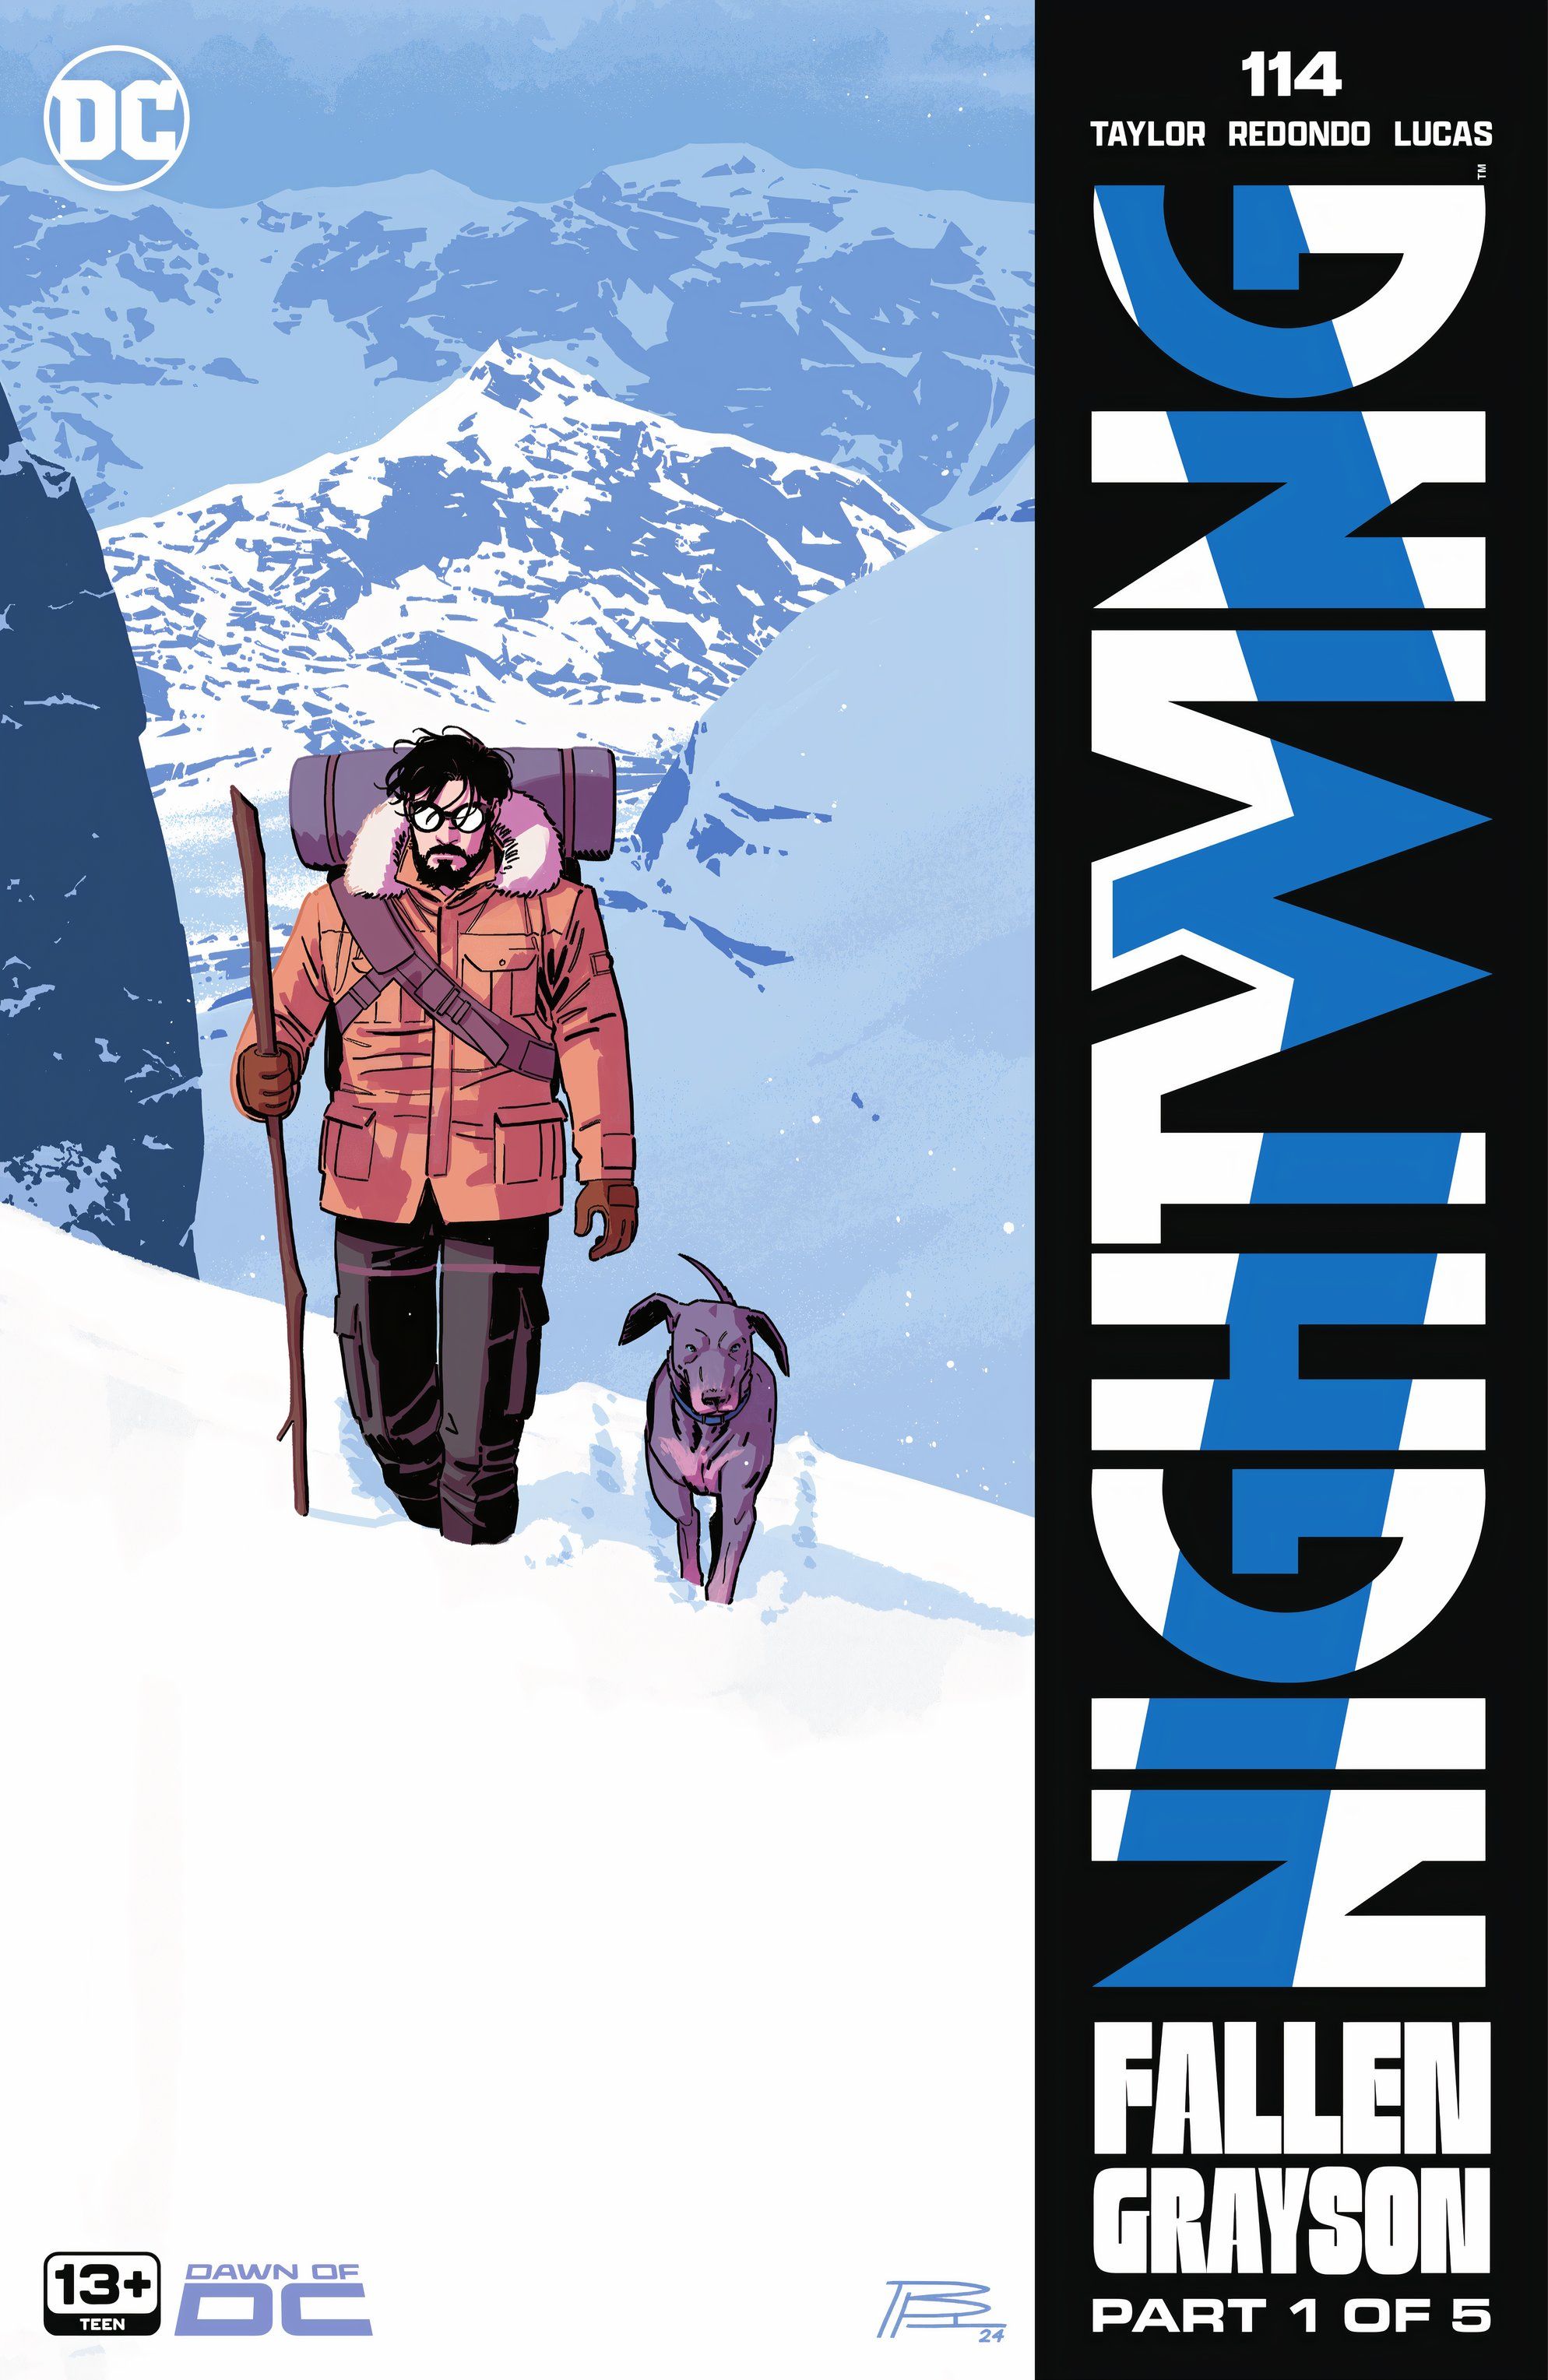 Nightwing, sporting a beard and winter gear, hikes through snow with his dog Haley. 